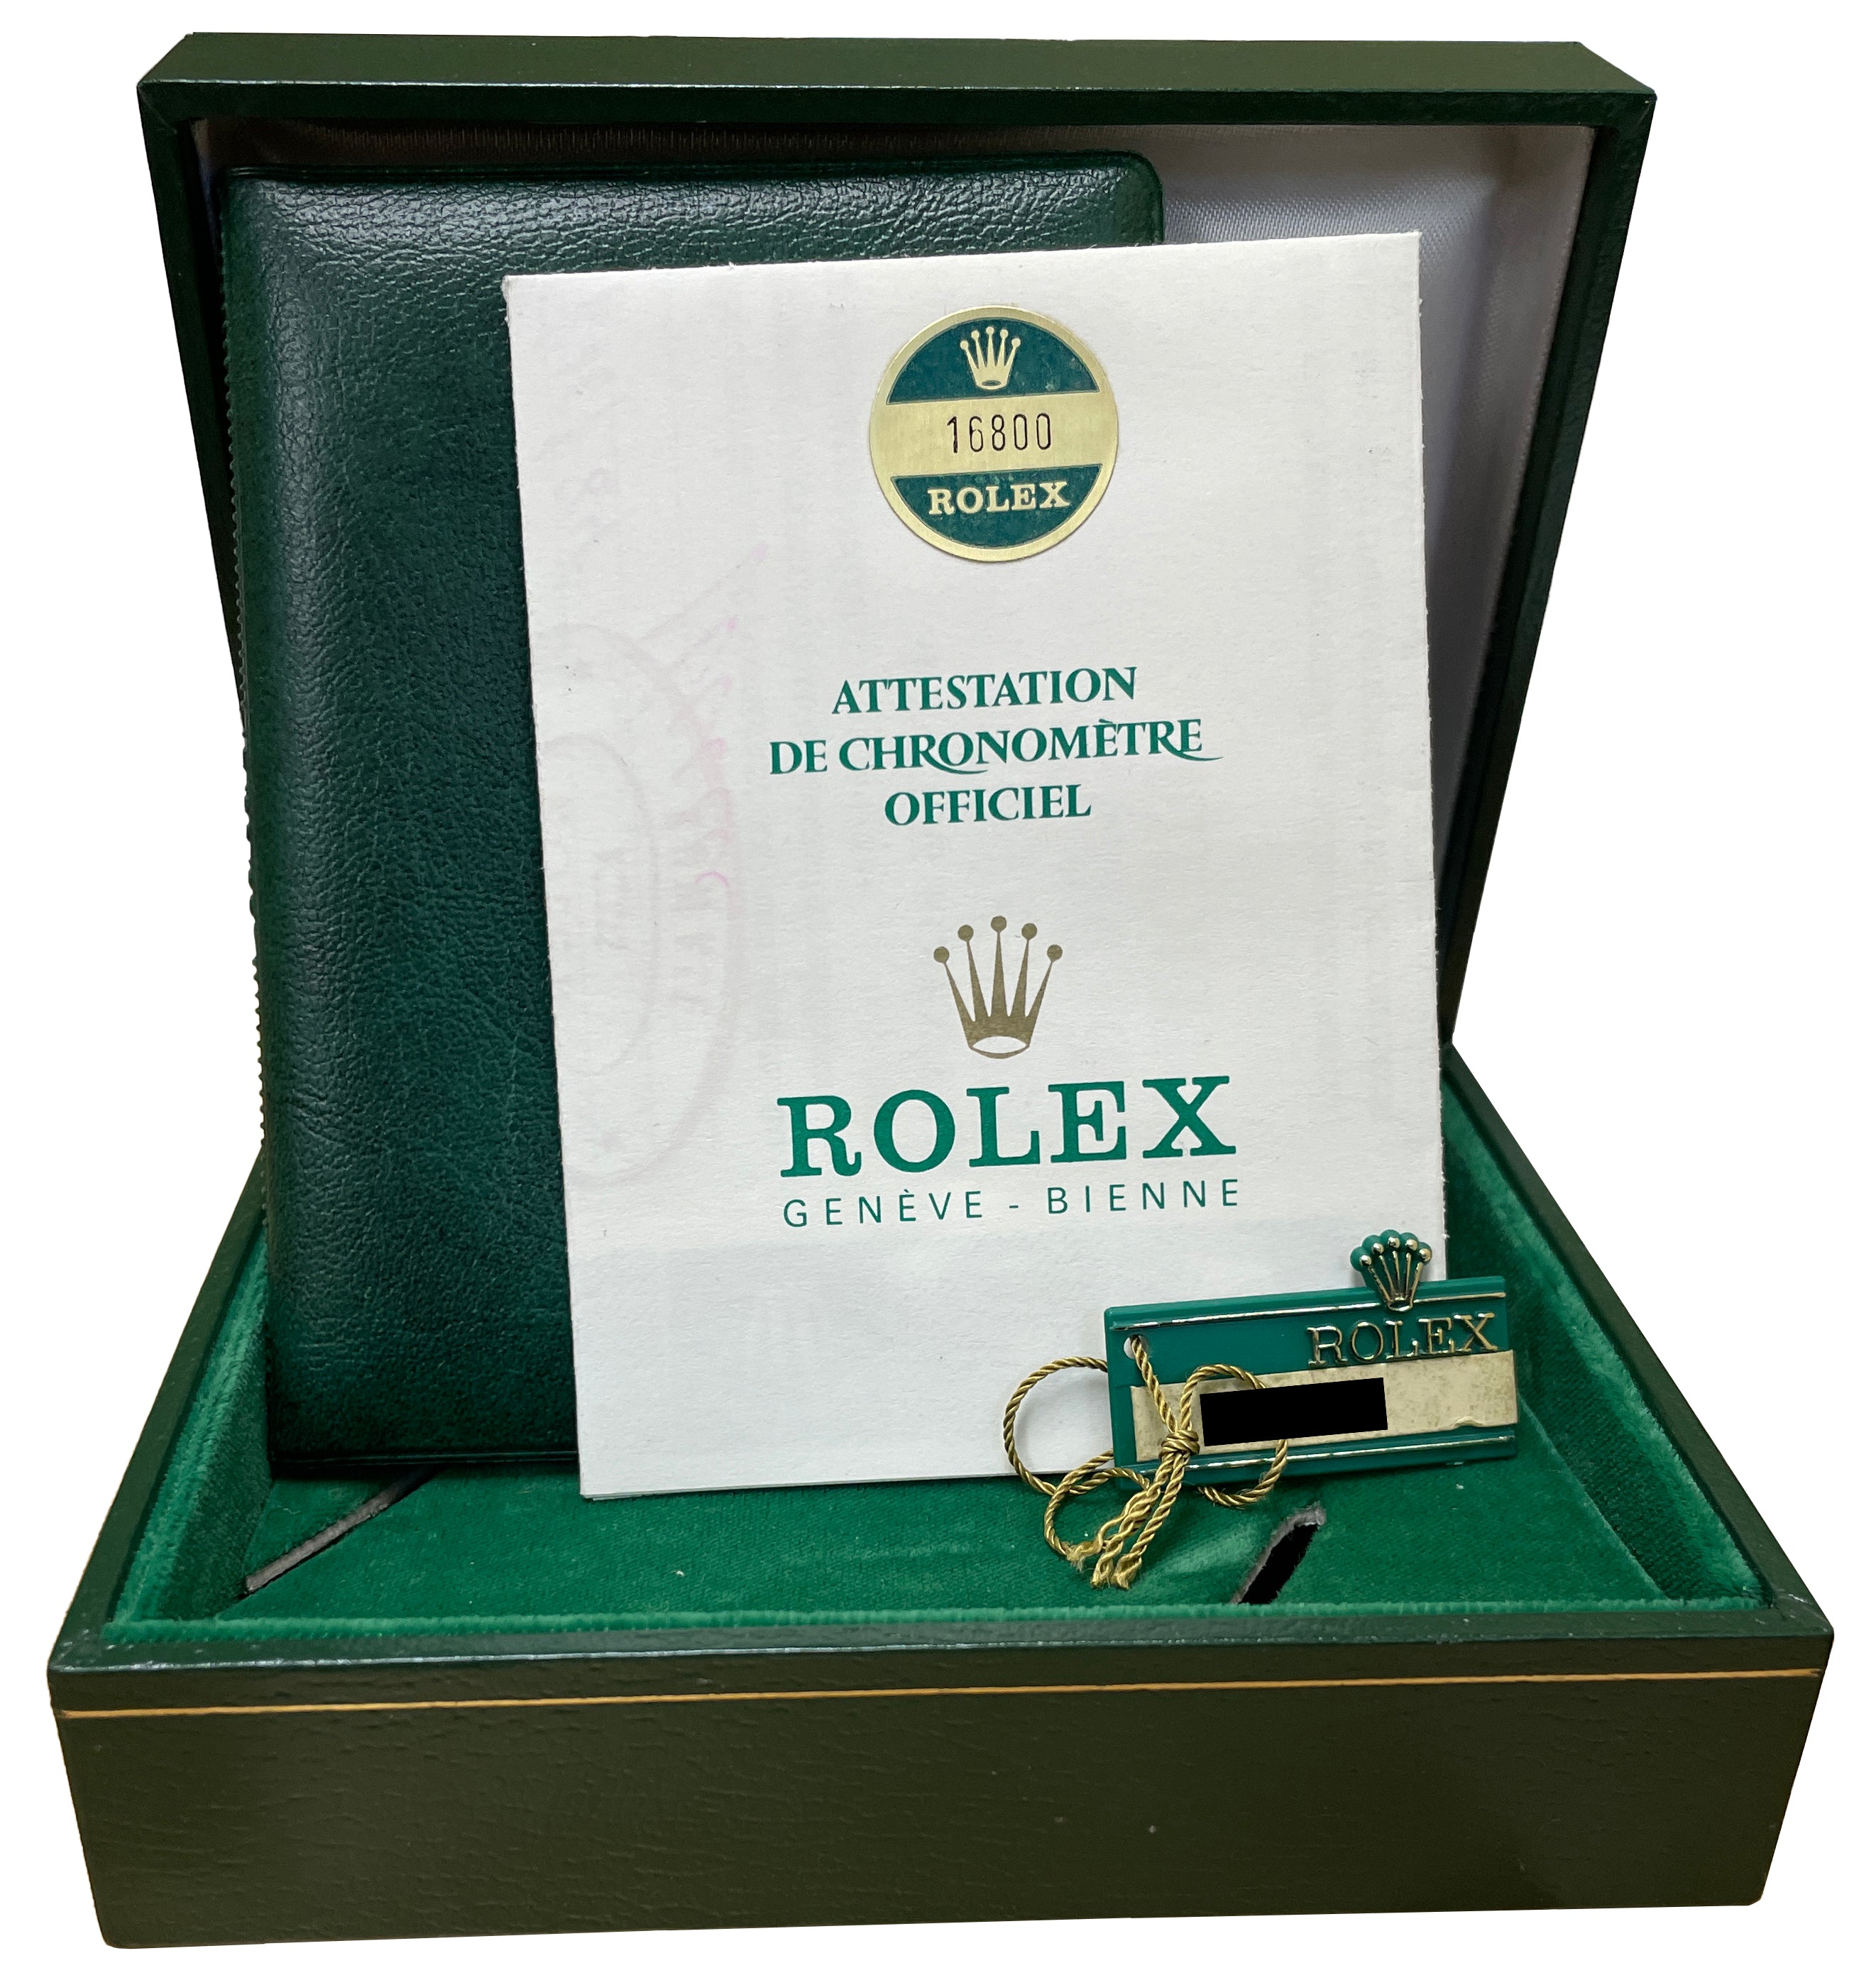 1984 Rolex Submariner Date PATINA Stainless Steel 40mm Automatic Watch 16800 B+P